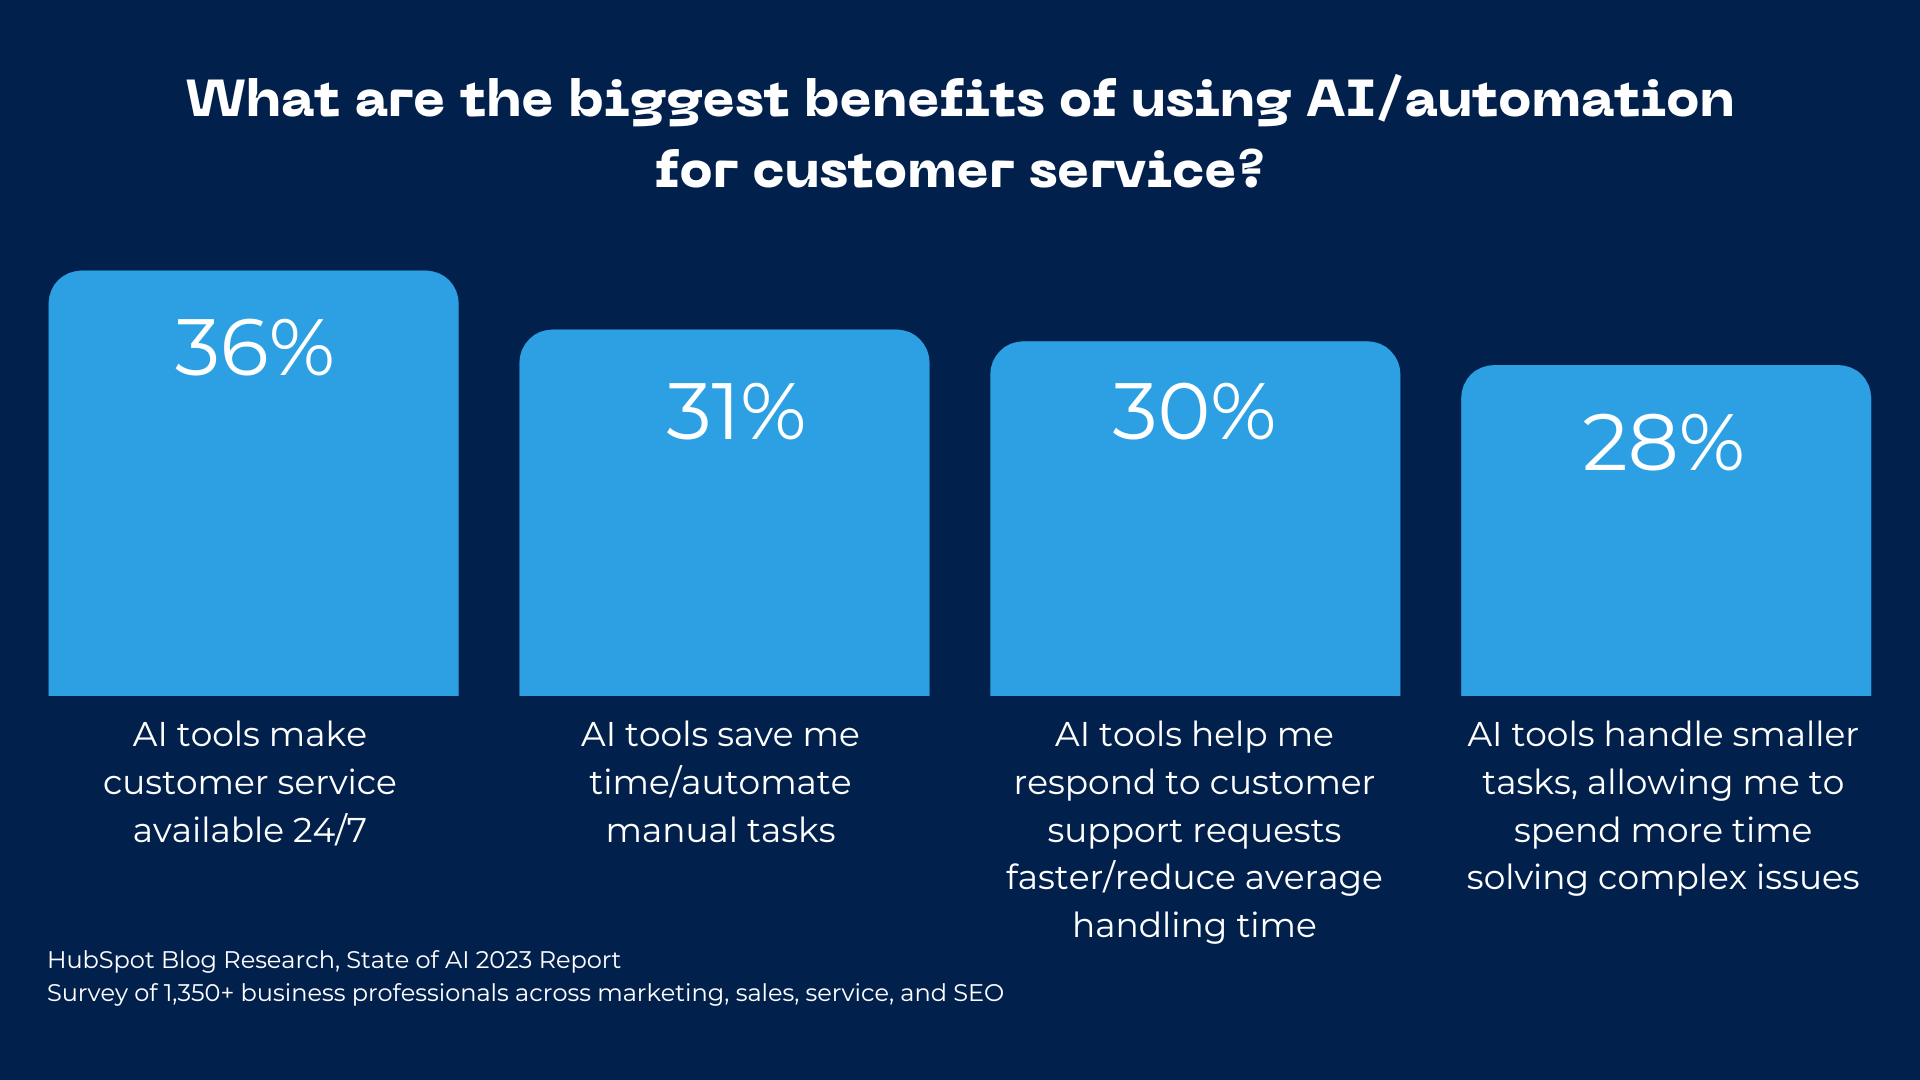 benefits to using AI for customer service